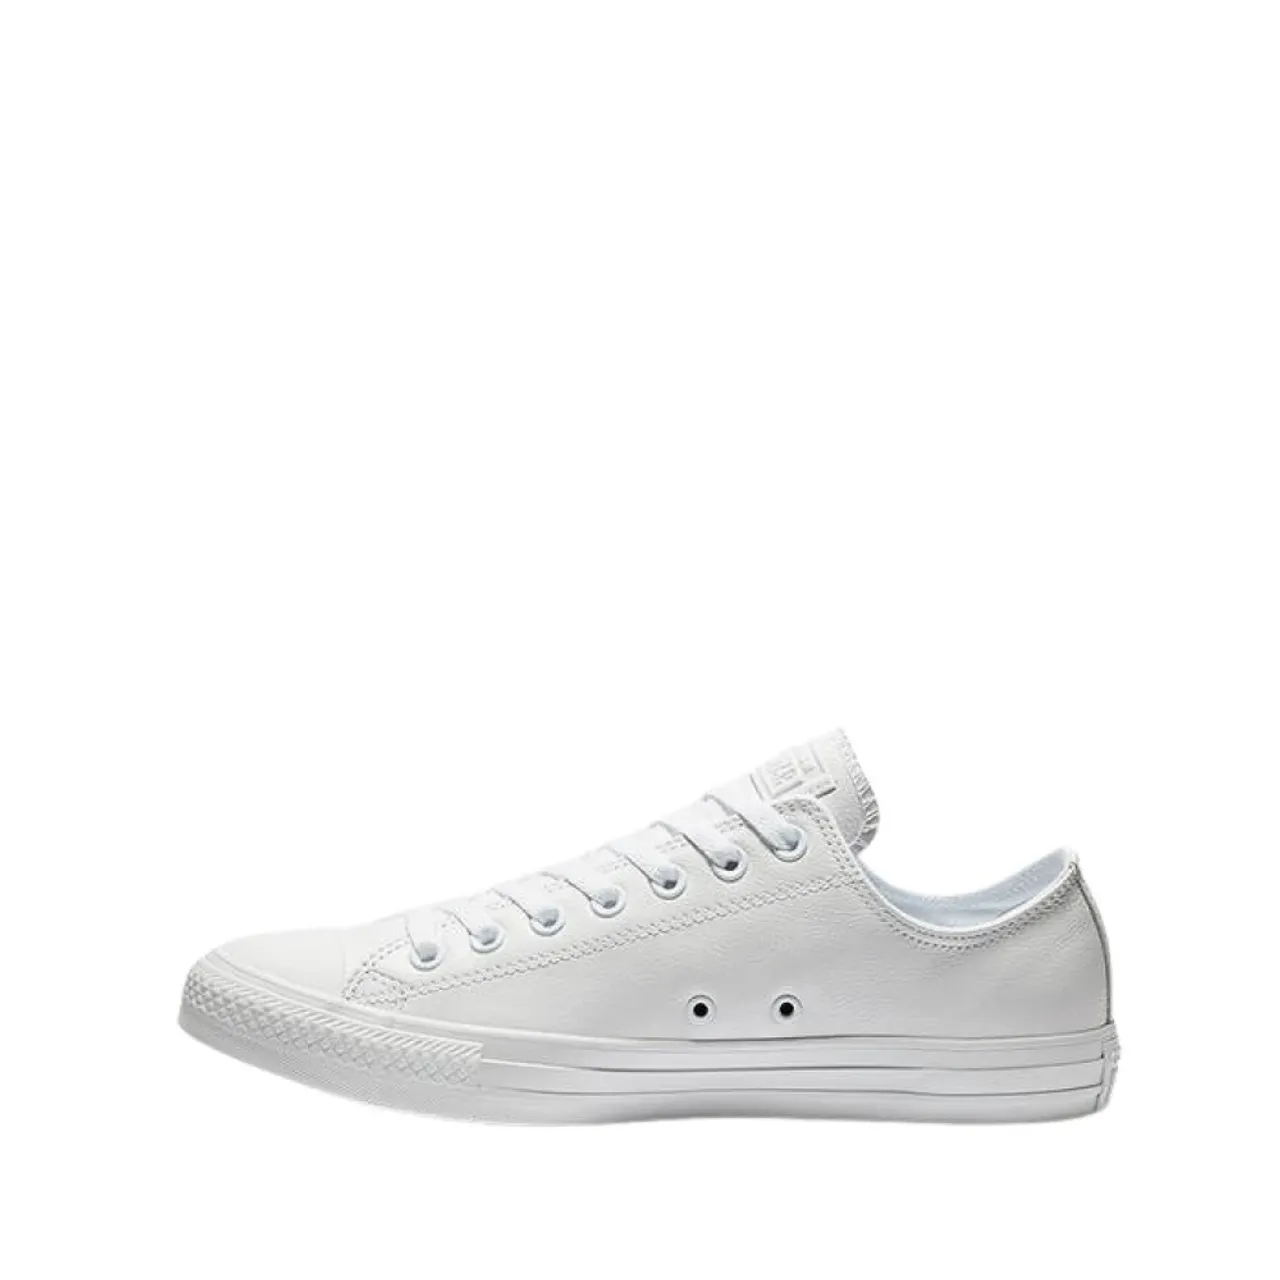 Converse , Sneakers Chuck Taylor All Star 136823C ,White male, Sizes: 5 1/2 UK, 4 UK, 11 UK, 6 UK, 3 1/2 UK, 12 UK, 8 1/2 UK, 2 1/2 UK, 7 1/2 UK, 3 UK